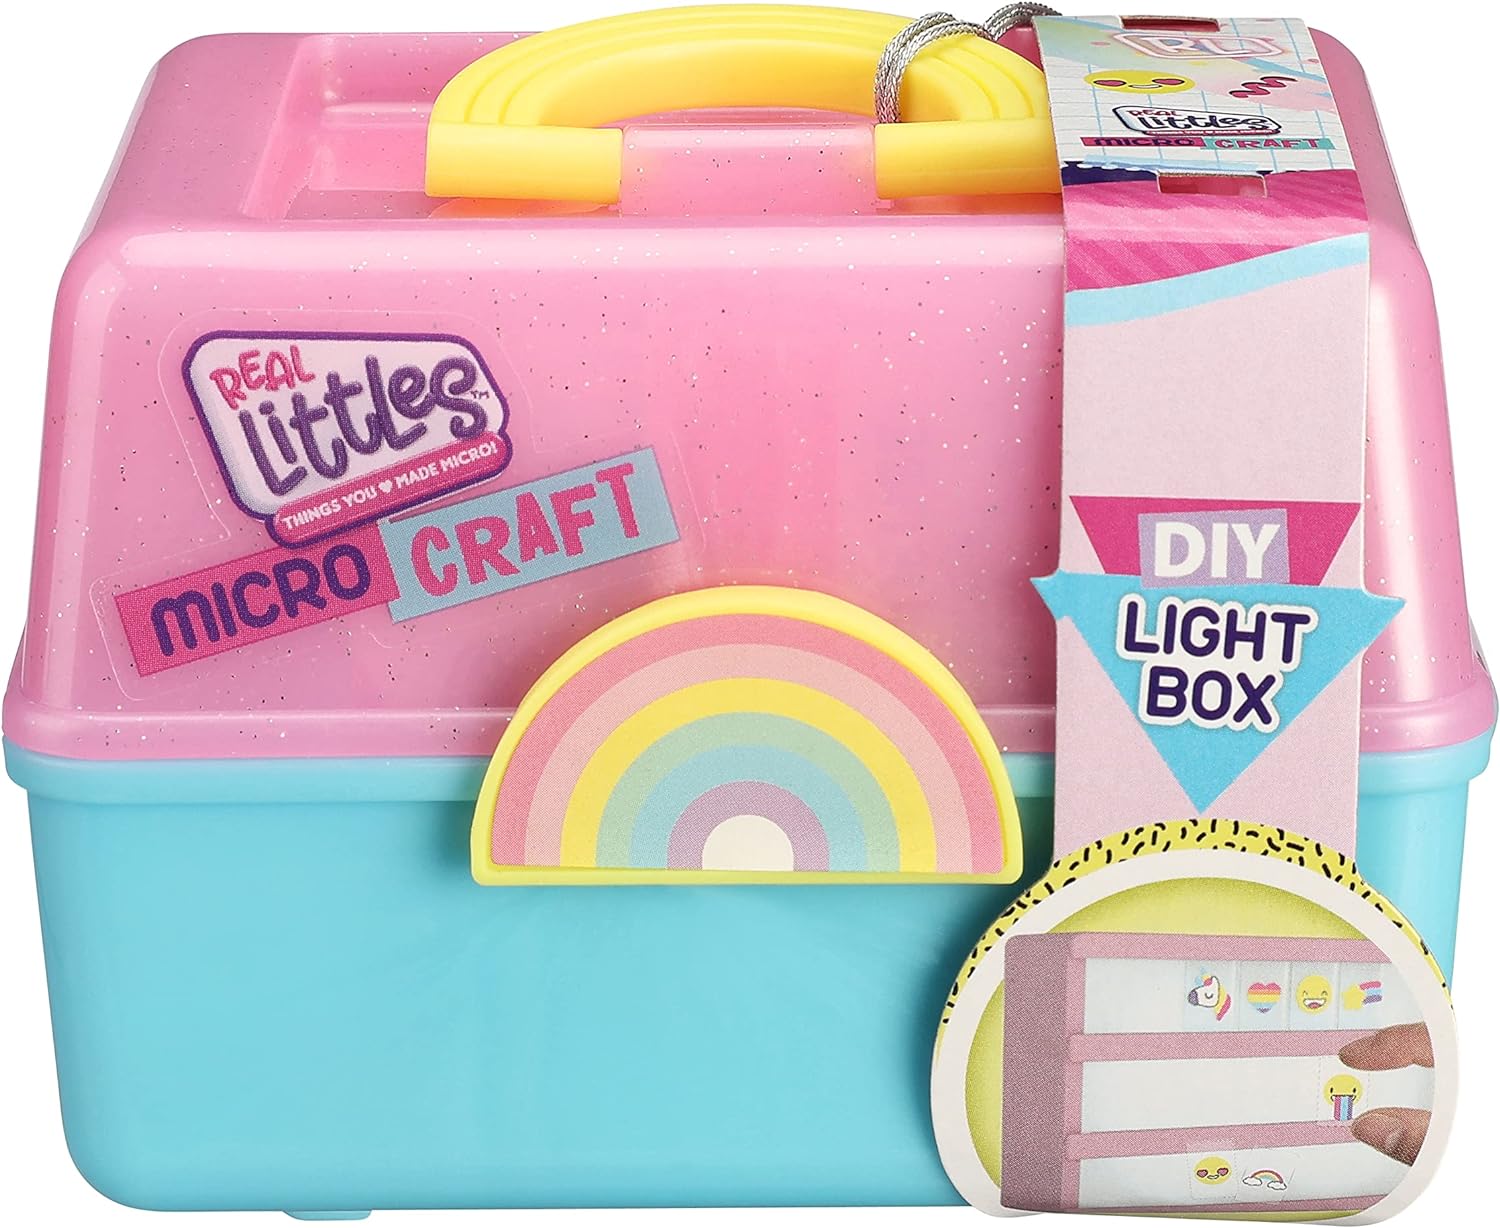 Real Littles Micro Craft Packs